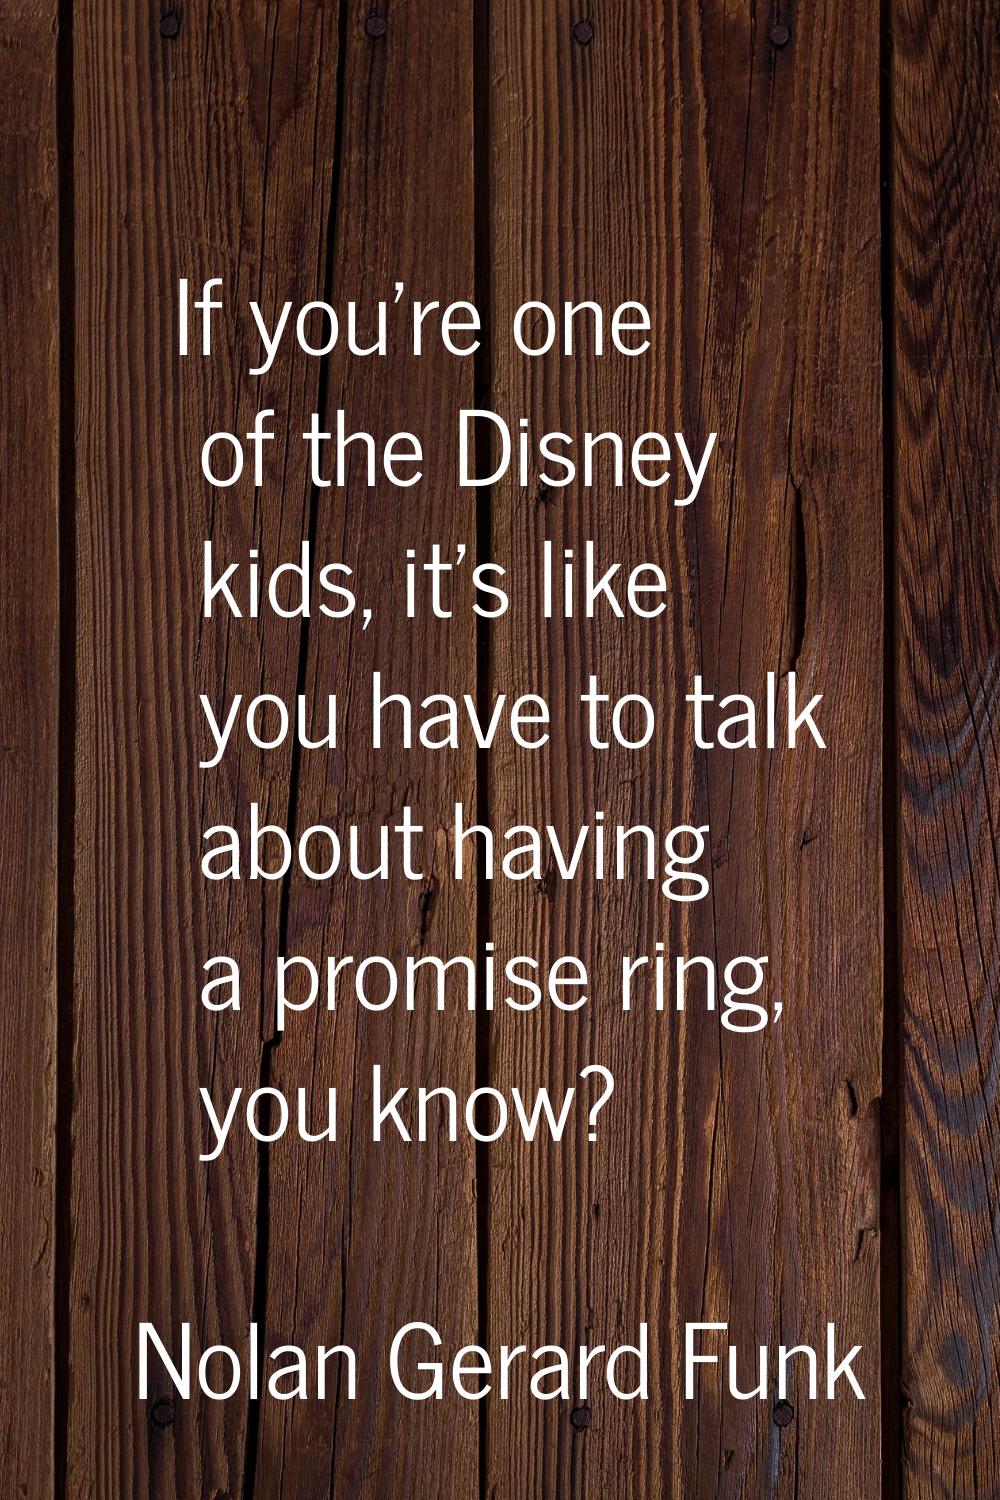 If you're one of the Disney kids, it's like you have to talk about having a promise ring, you know?